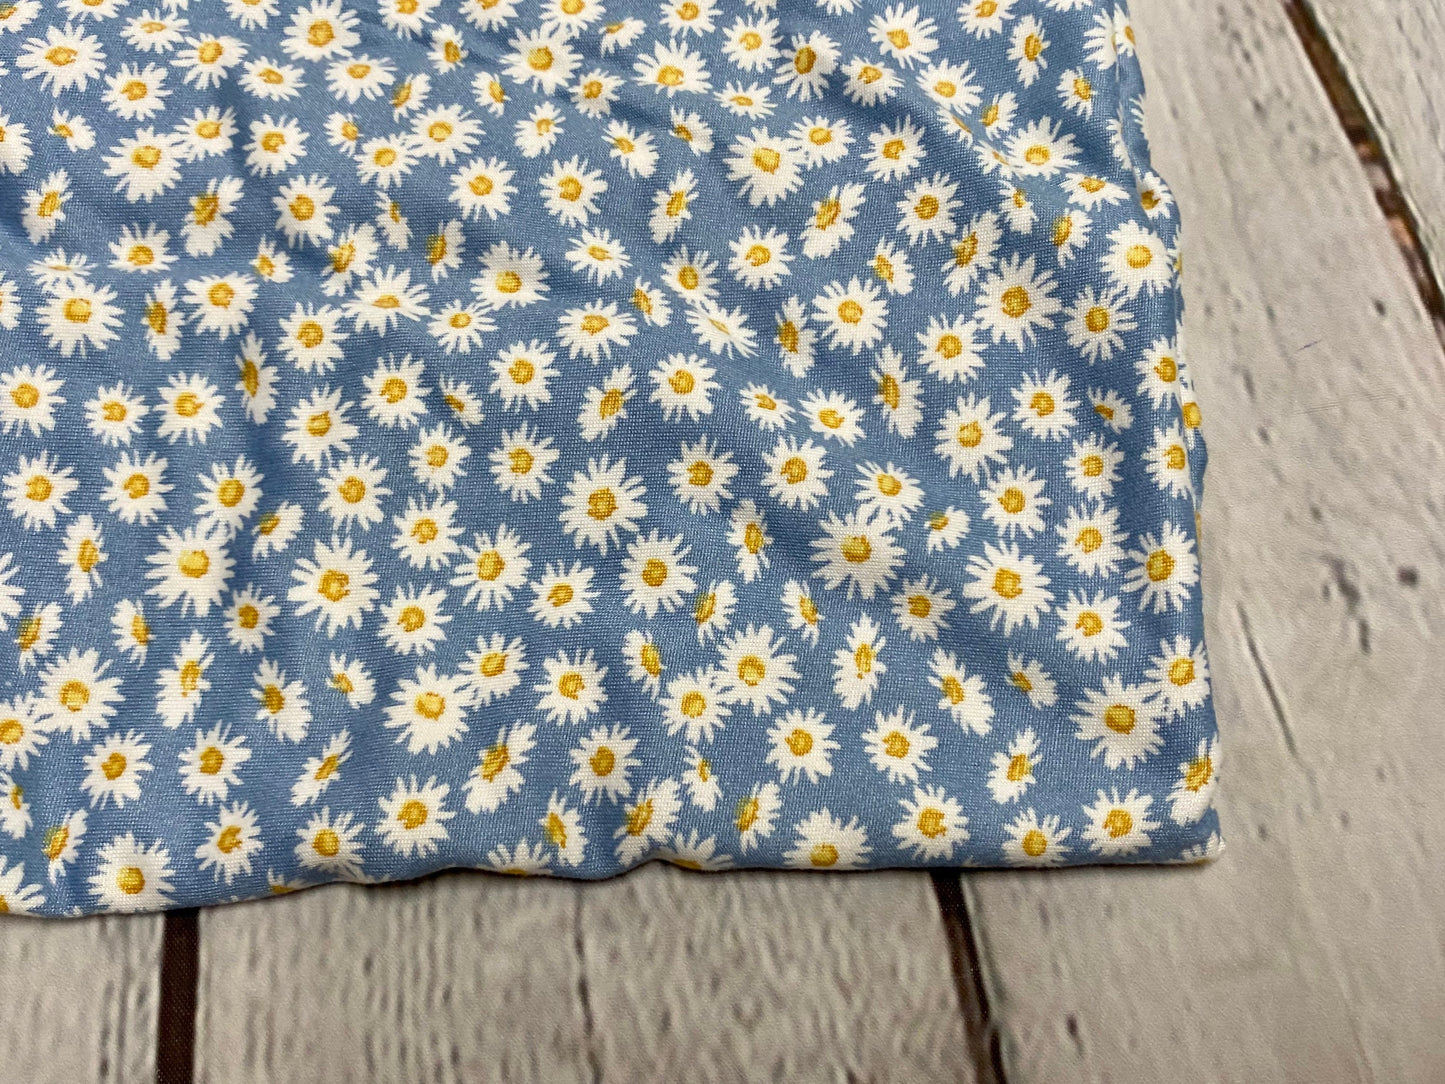 DBP Double Brushed Poly Spandex Print Mini Daisy  Flower Floral Print By The Yard